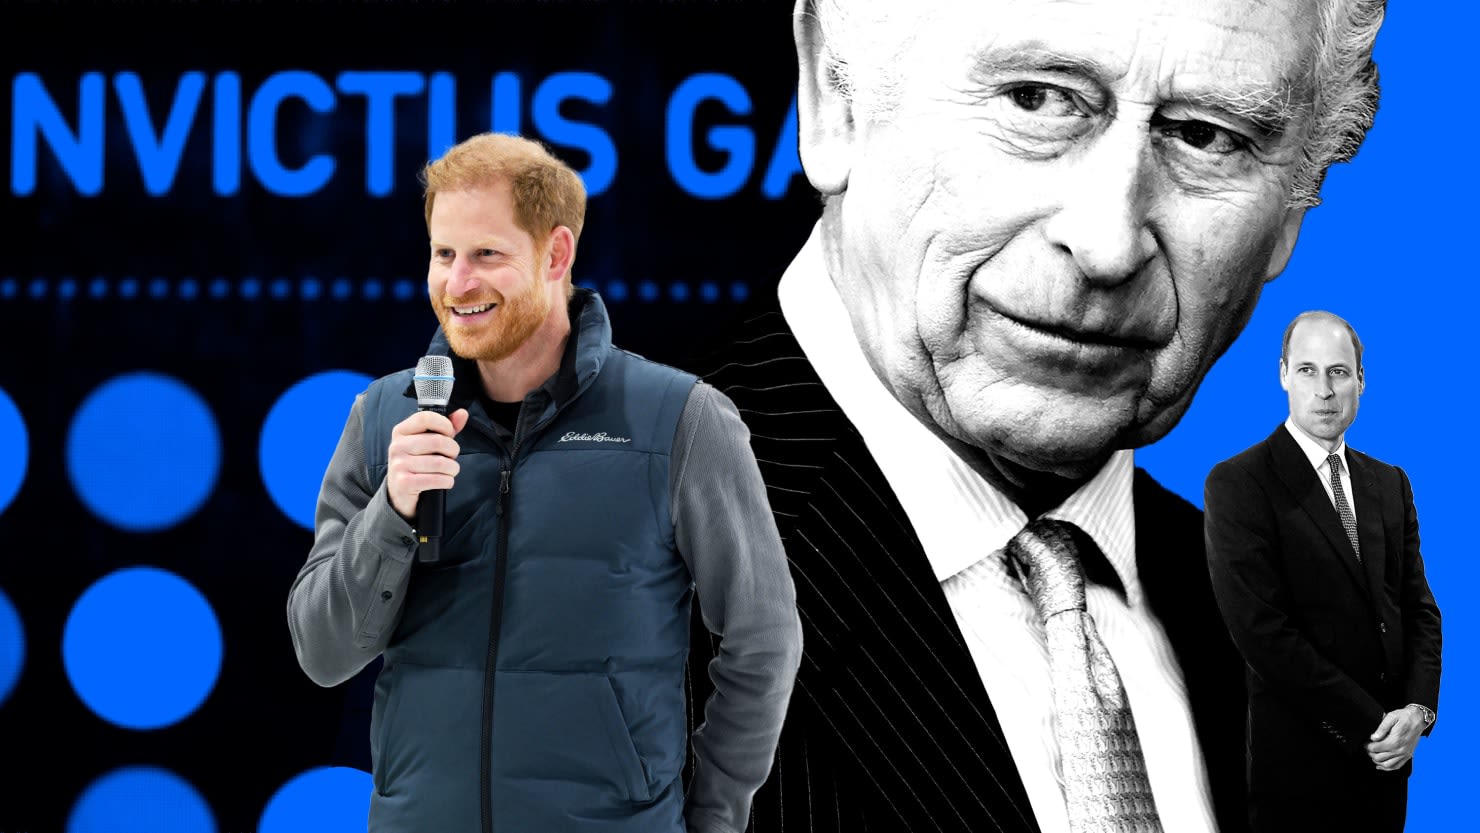 Why Won’t the Royals Support Prince Harry’s Invictus Games?